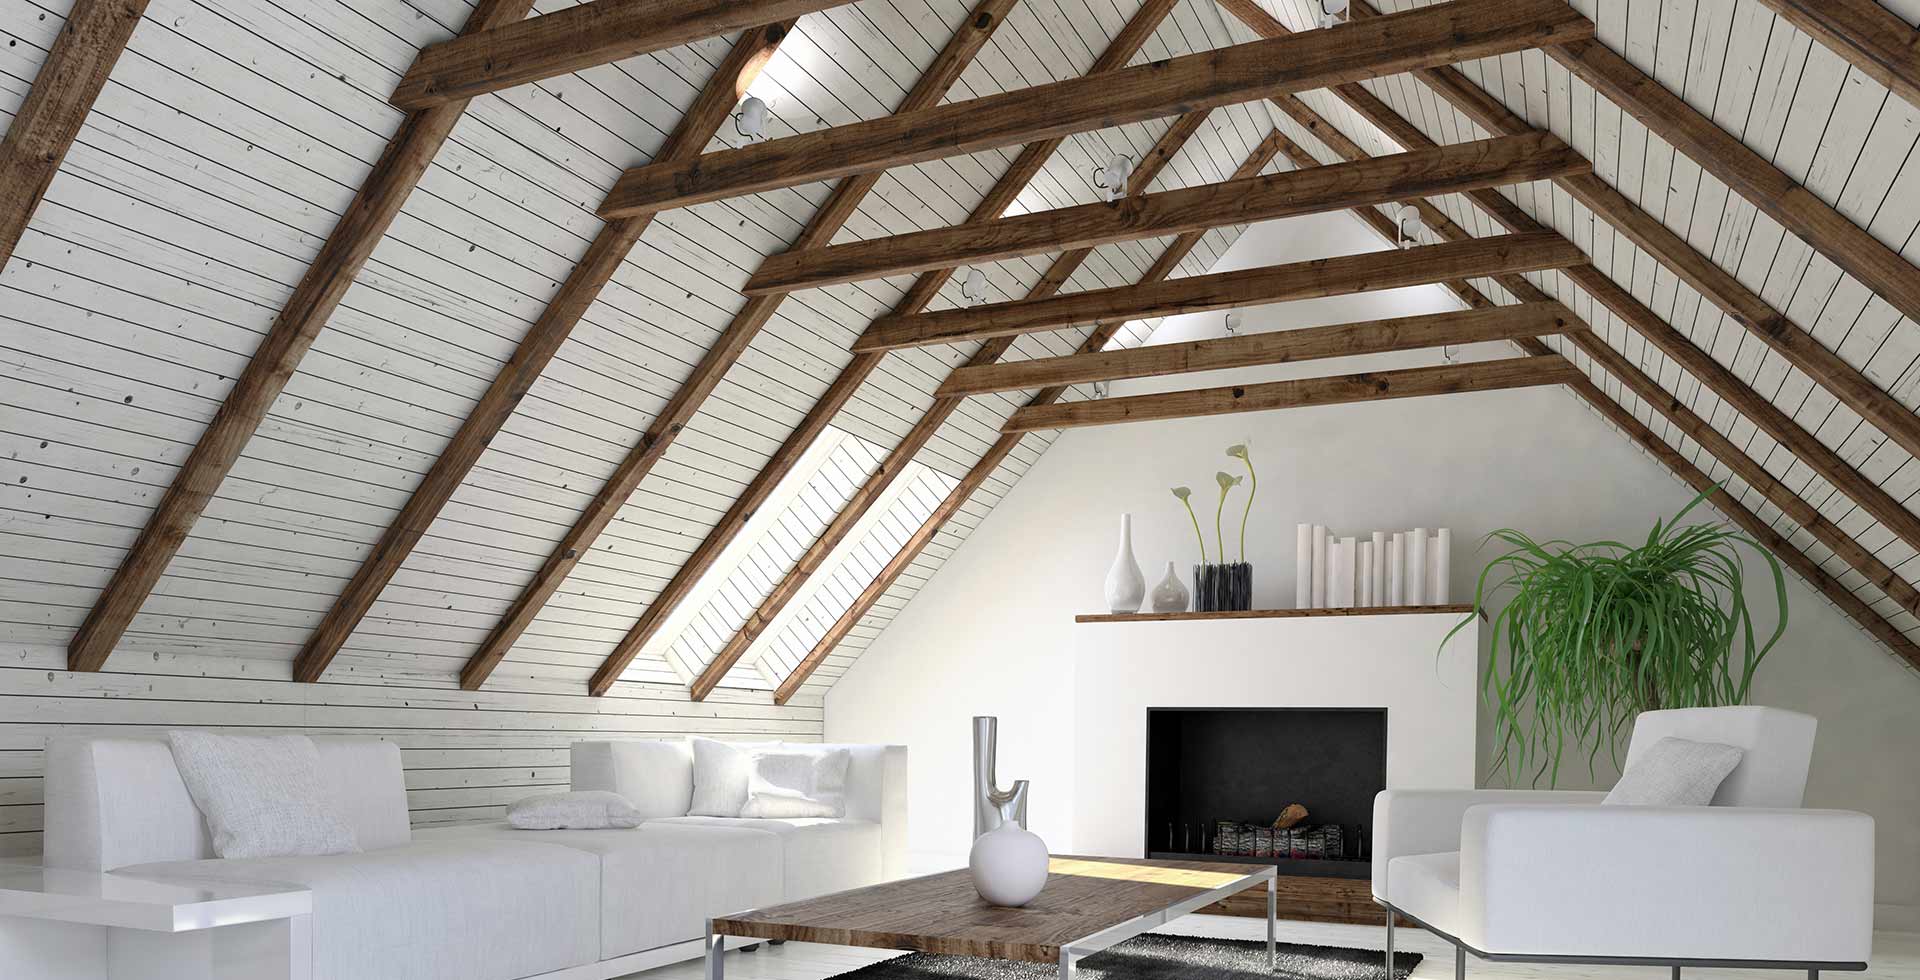 living room with wooden beams in the ceiling